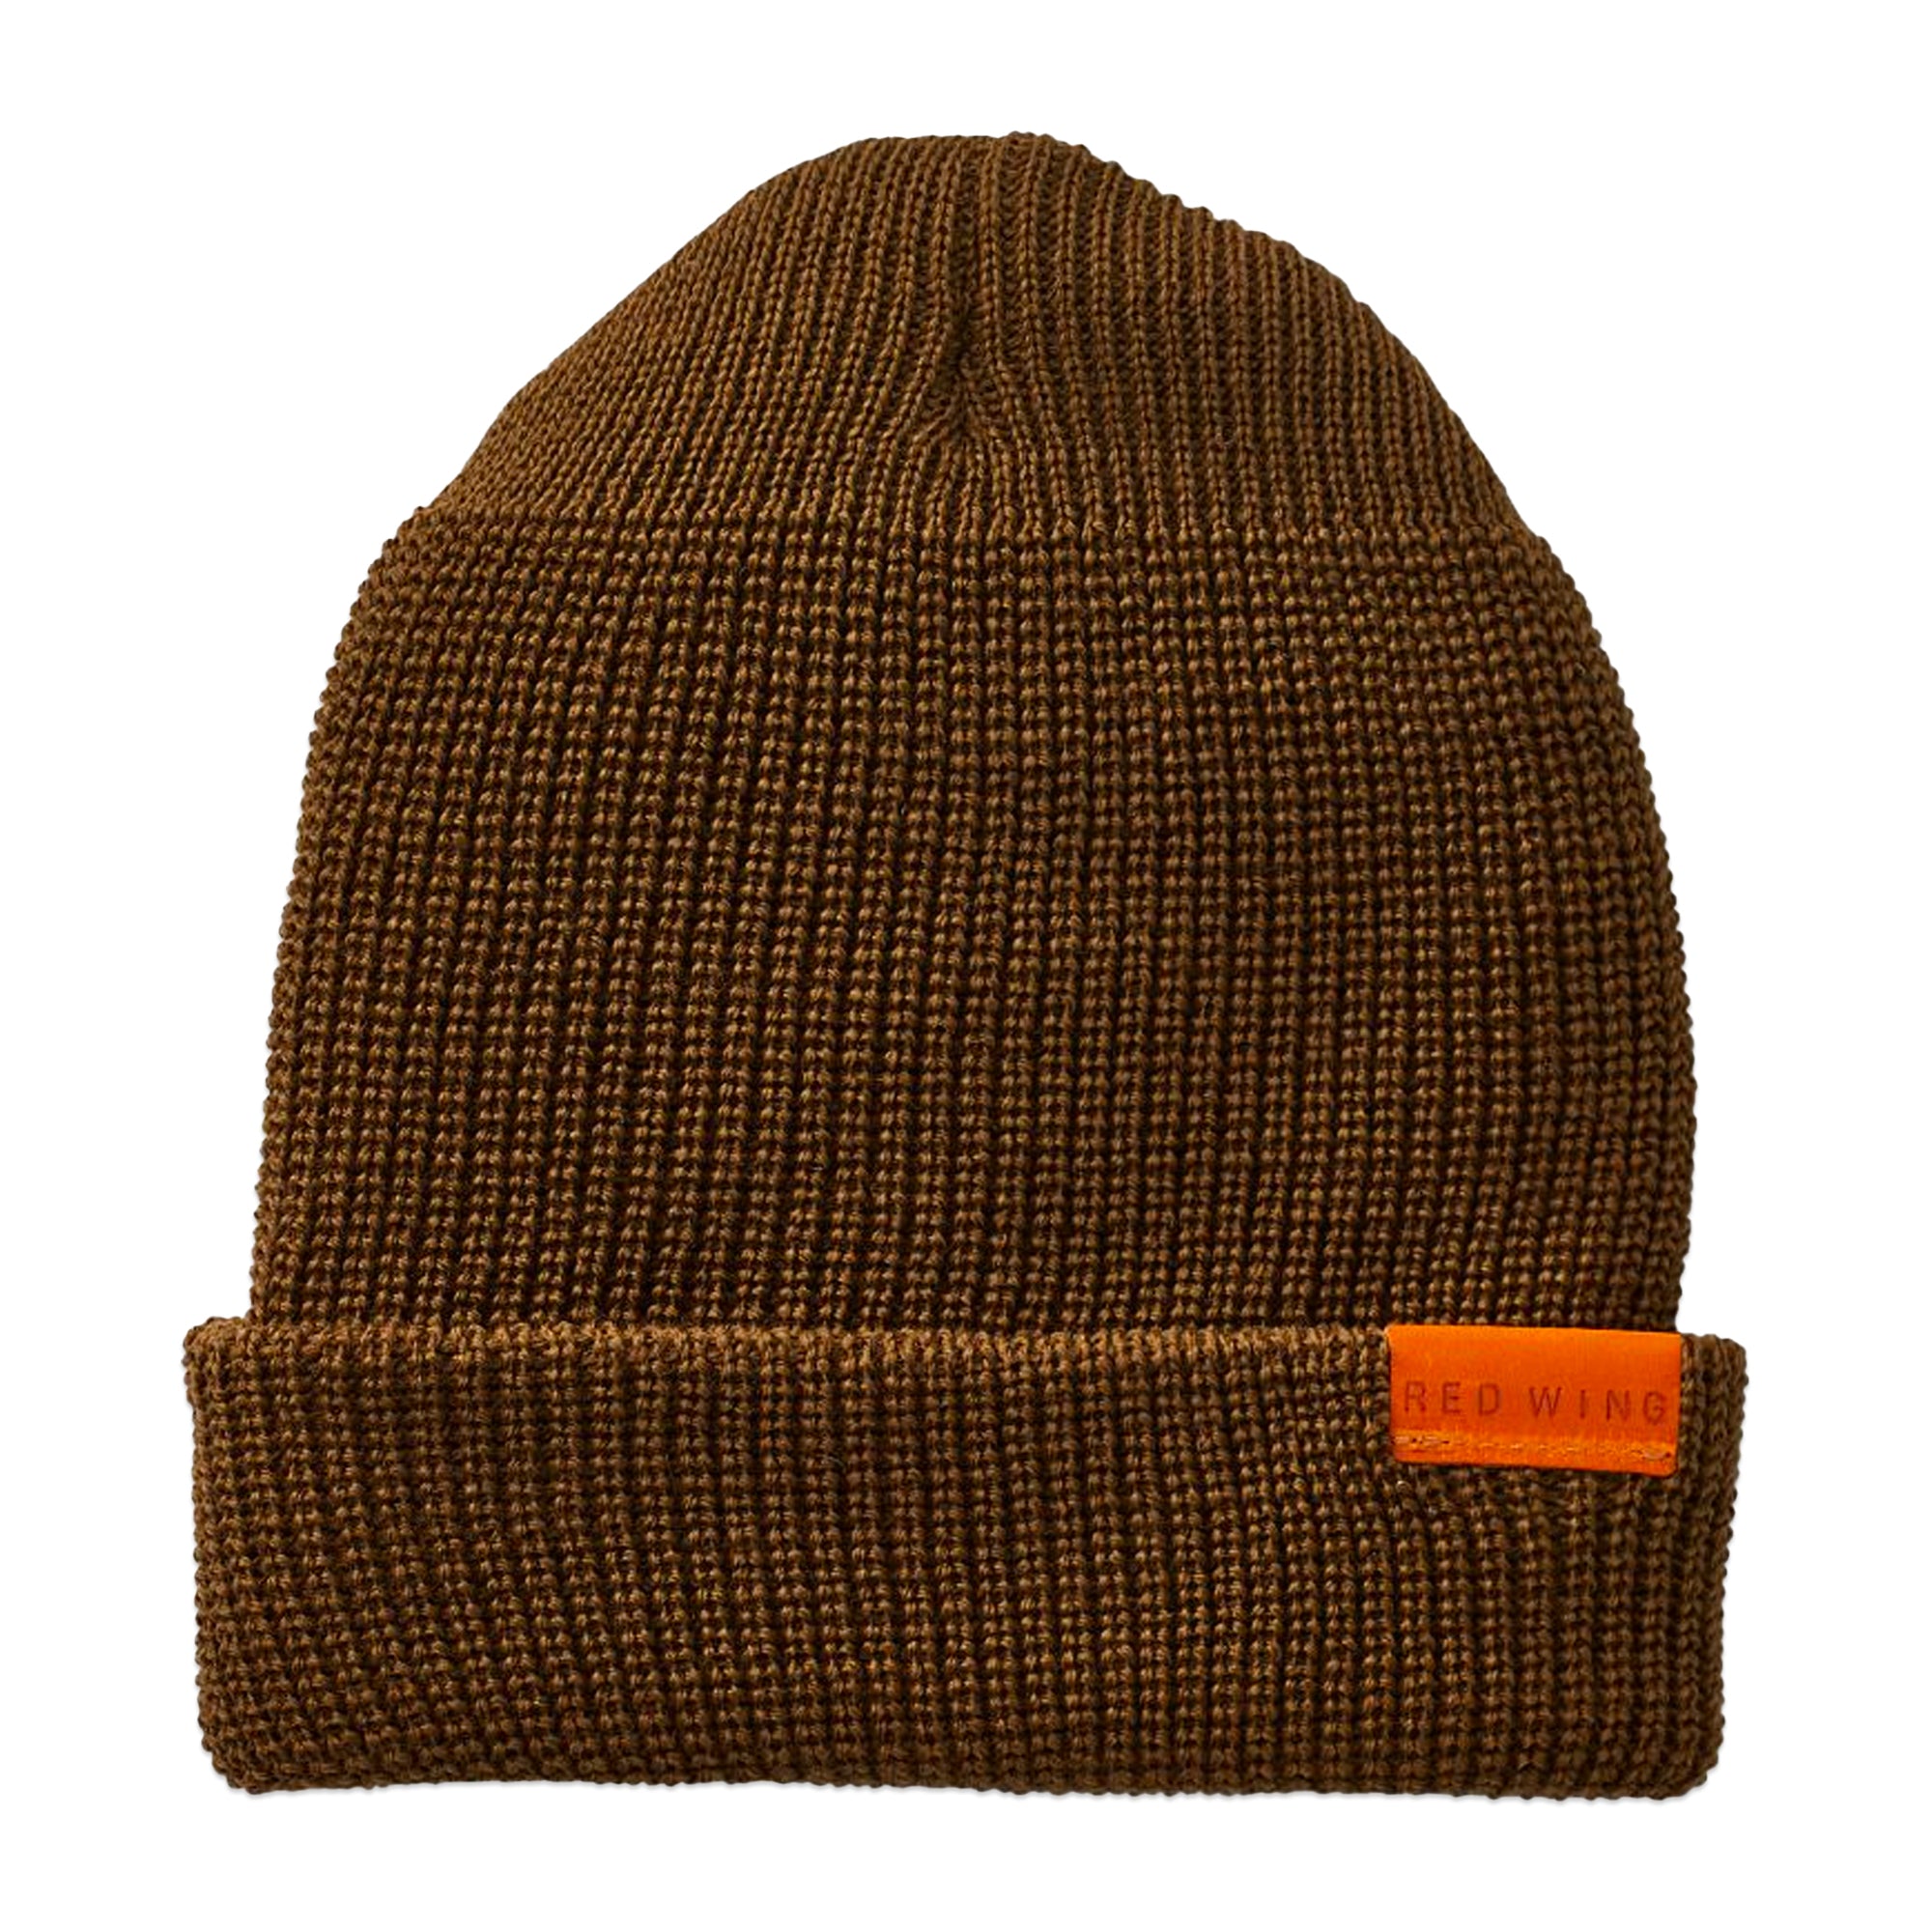 Red Wing Merino Wool Knit Beanie Hat - Olive